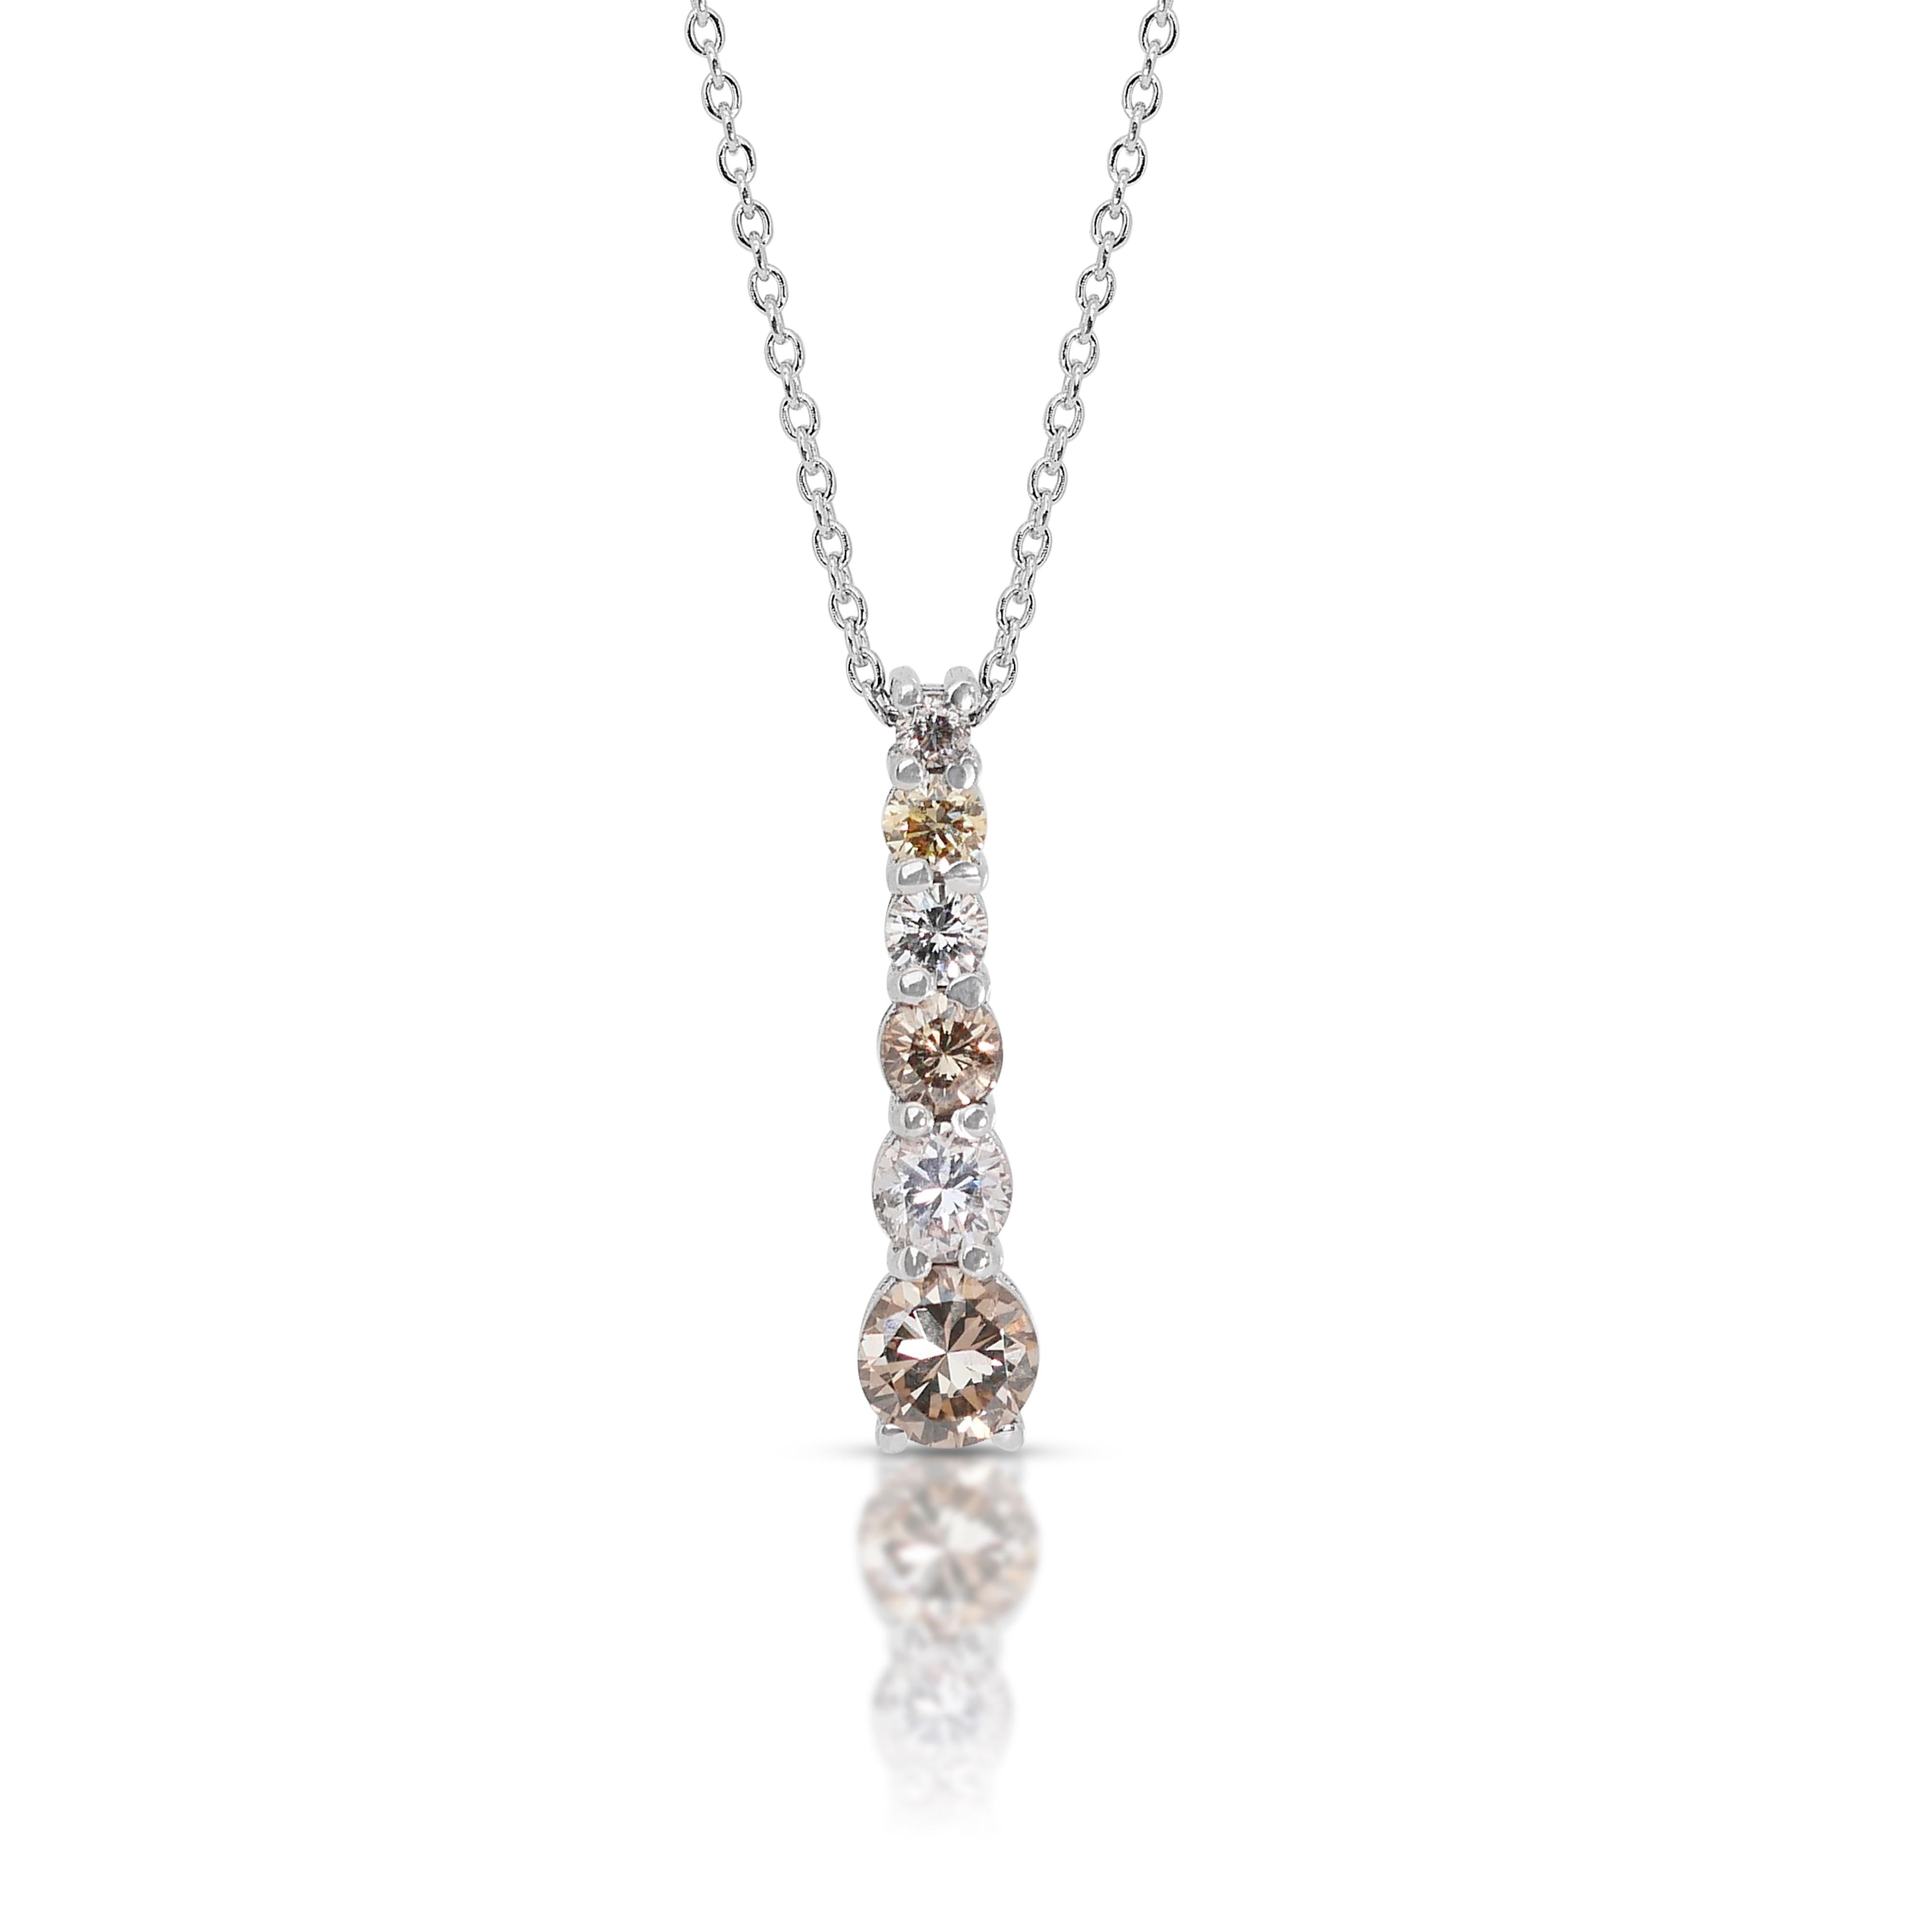 One of a Kind Radiant 18k White Gold Fancy Colored Diamond Necklace w/1.09 ct - IGI Certified

This exquisite 18k white gold fancy-colored diamond necklace showcases a sophisticated blend of elegance and color, making it a perfect choice for those